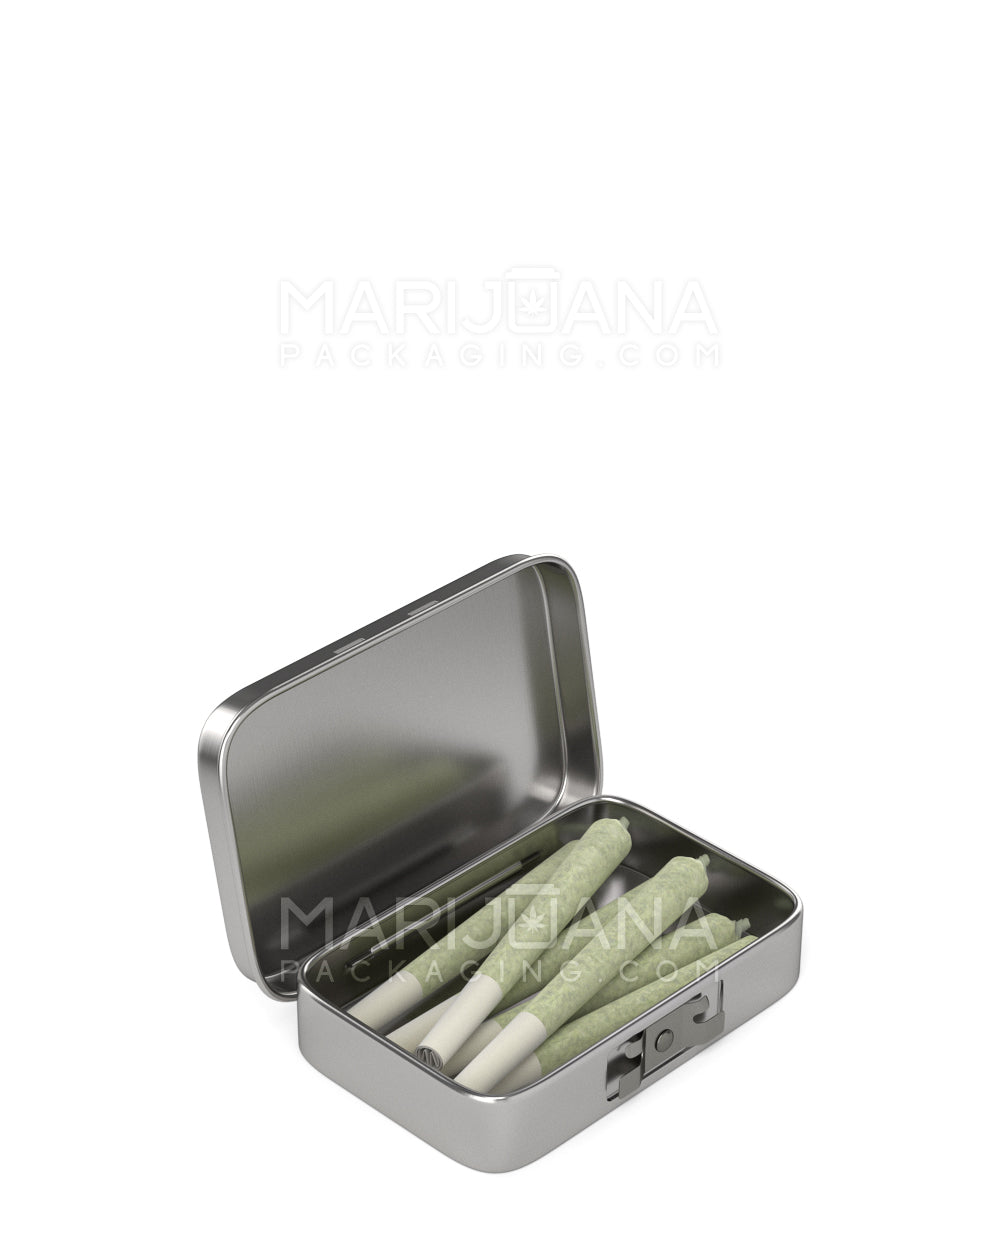 Child Resistant | 100% Recyclable Safely Lock Ultra Edible & Joint Box | 79mm x 53.5mm - Silver Tin - 3